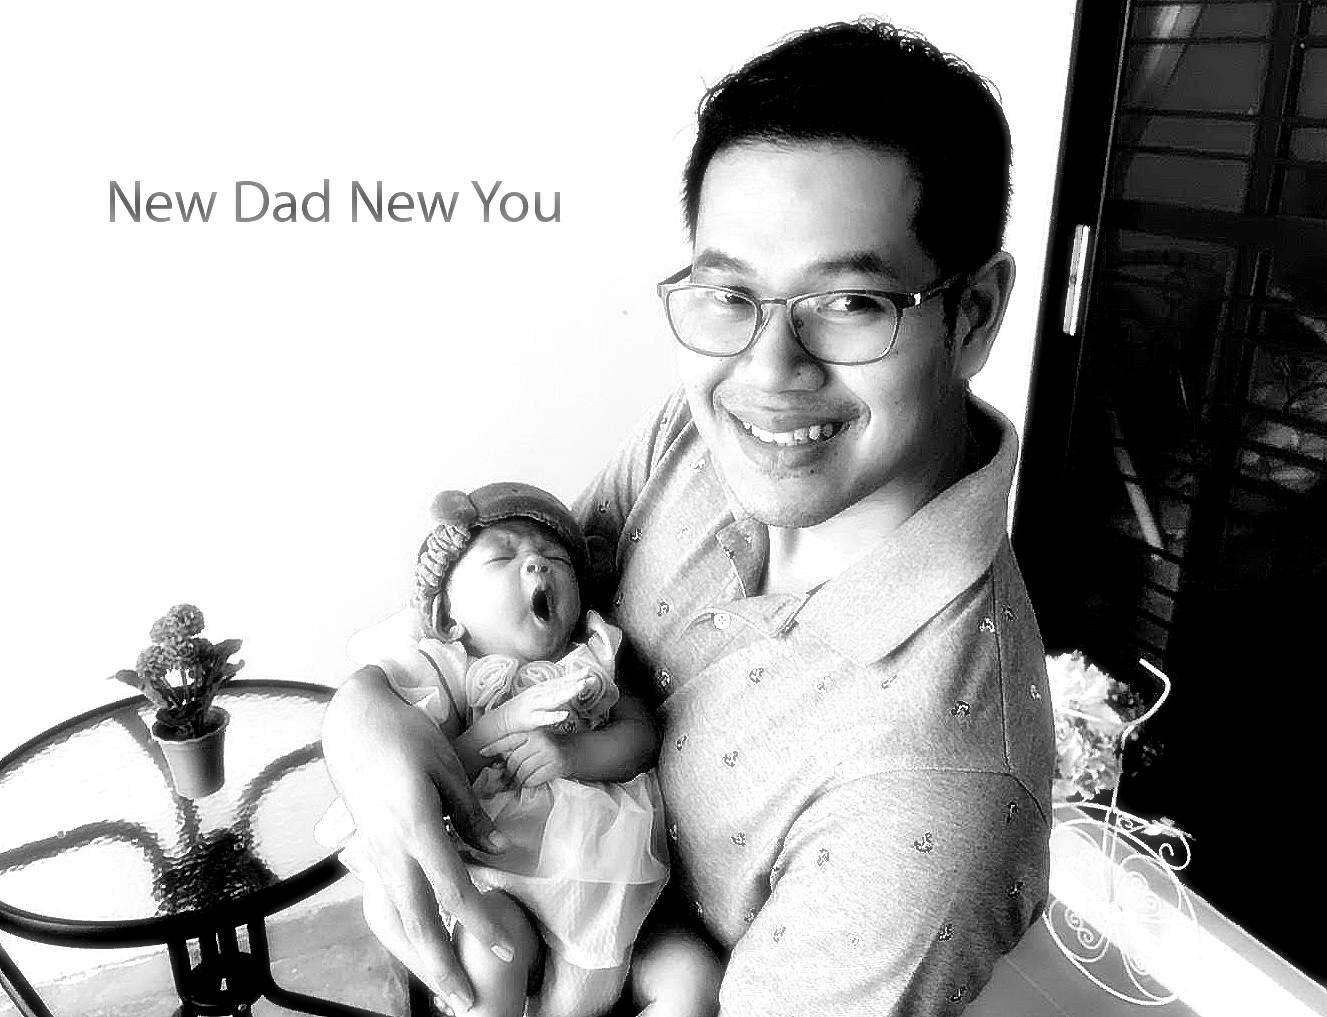 New Dad New You